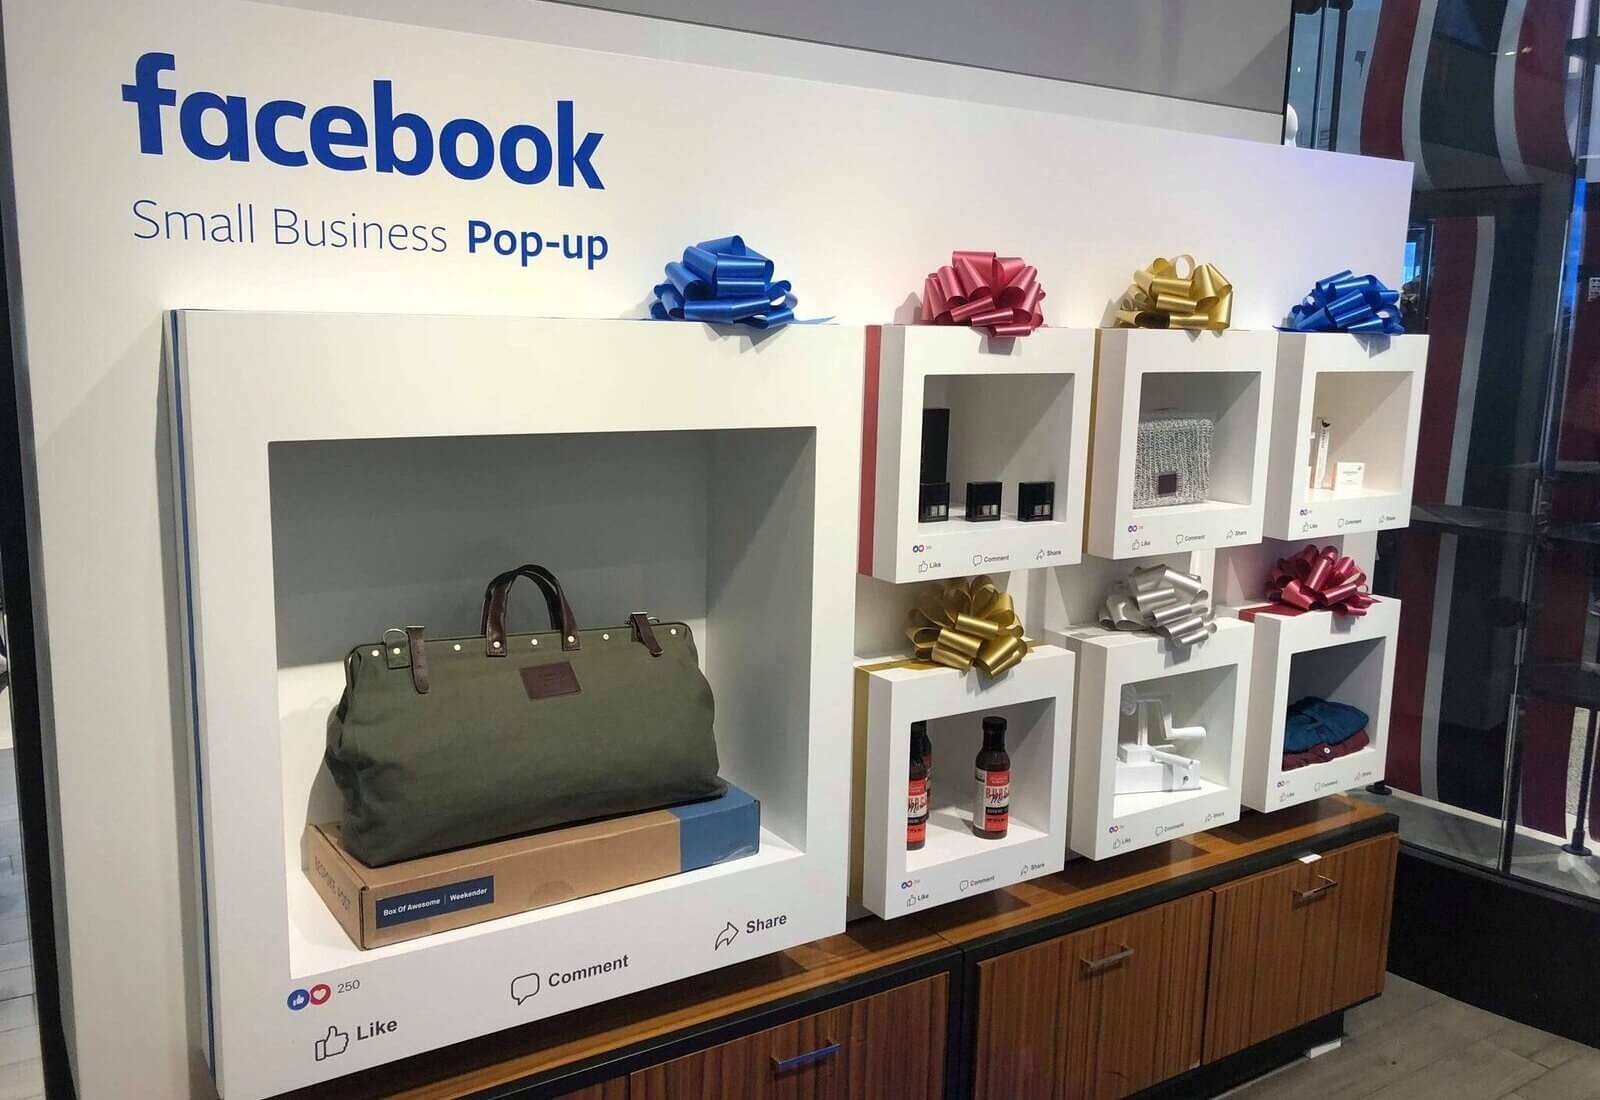 Facebook will experiment with physical retail by opening 'pop-up' shops in nine Macy's locations